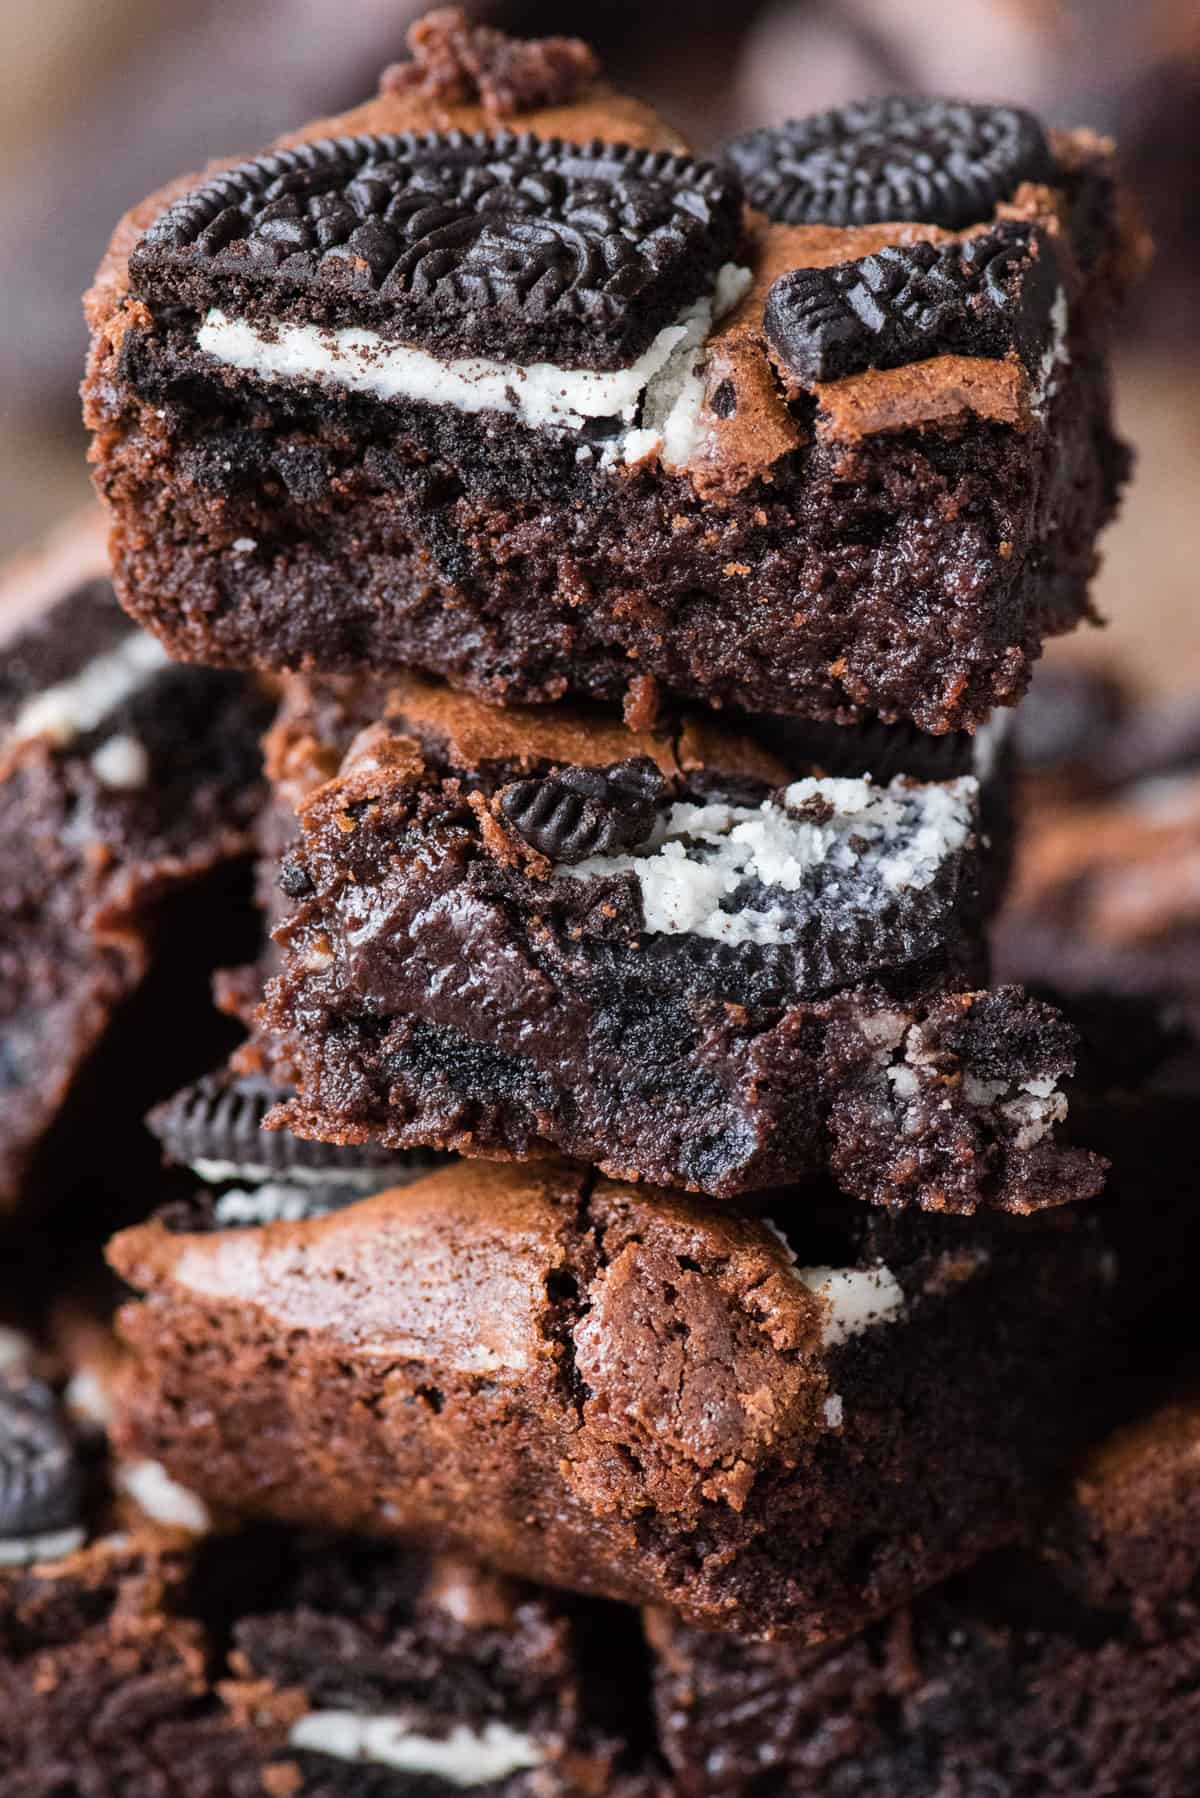 4 oreo brownies cut into squares and stacked on top of each other